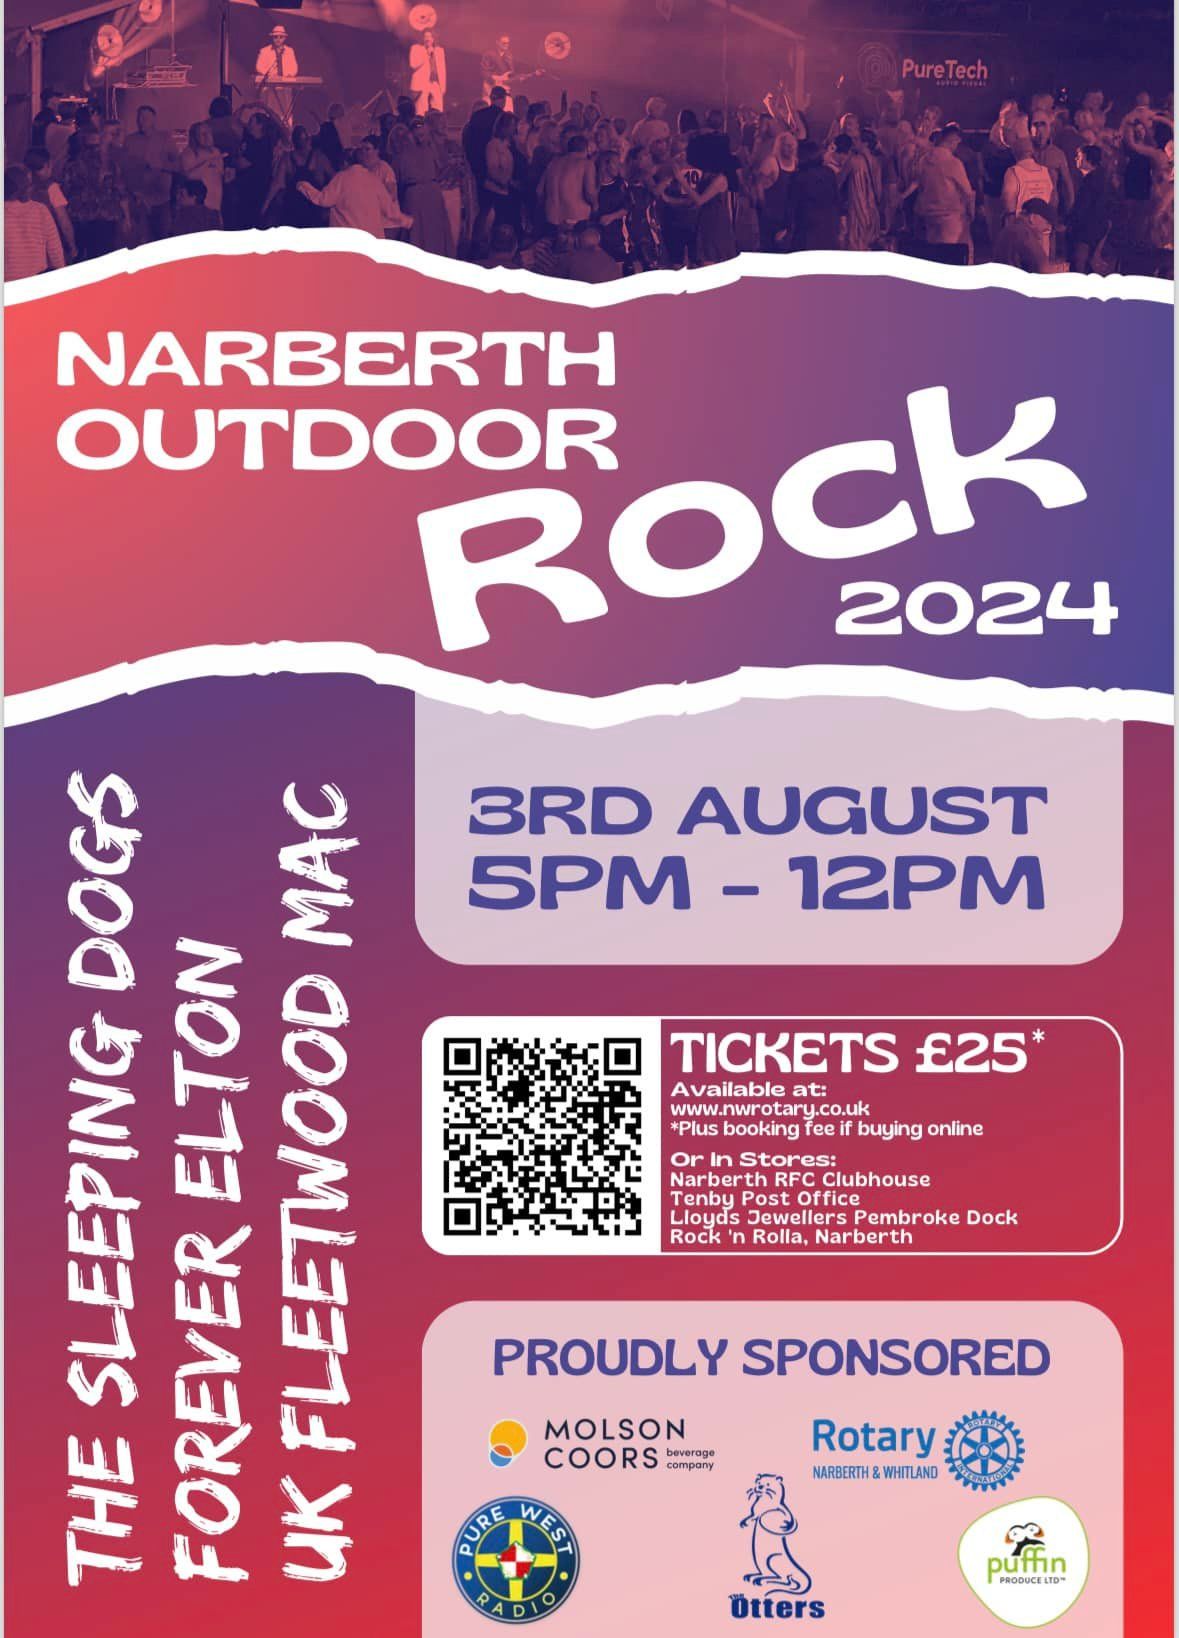 Narberth Outdoor Rock